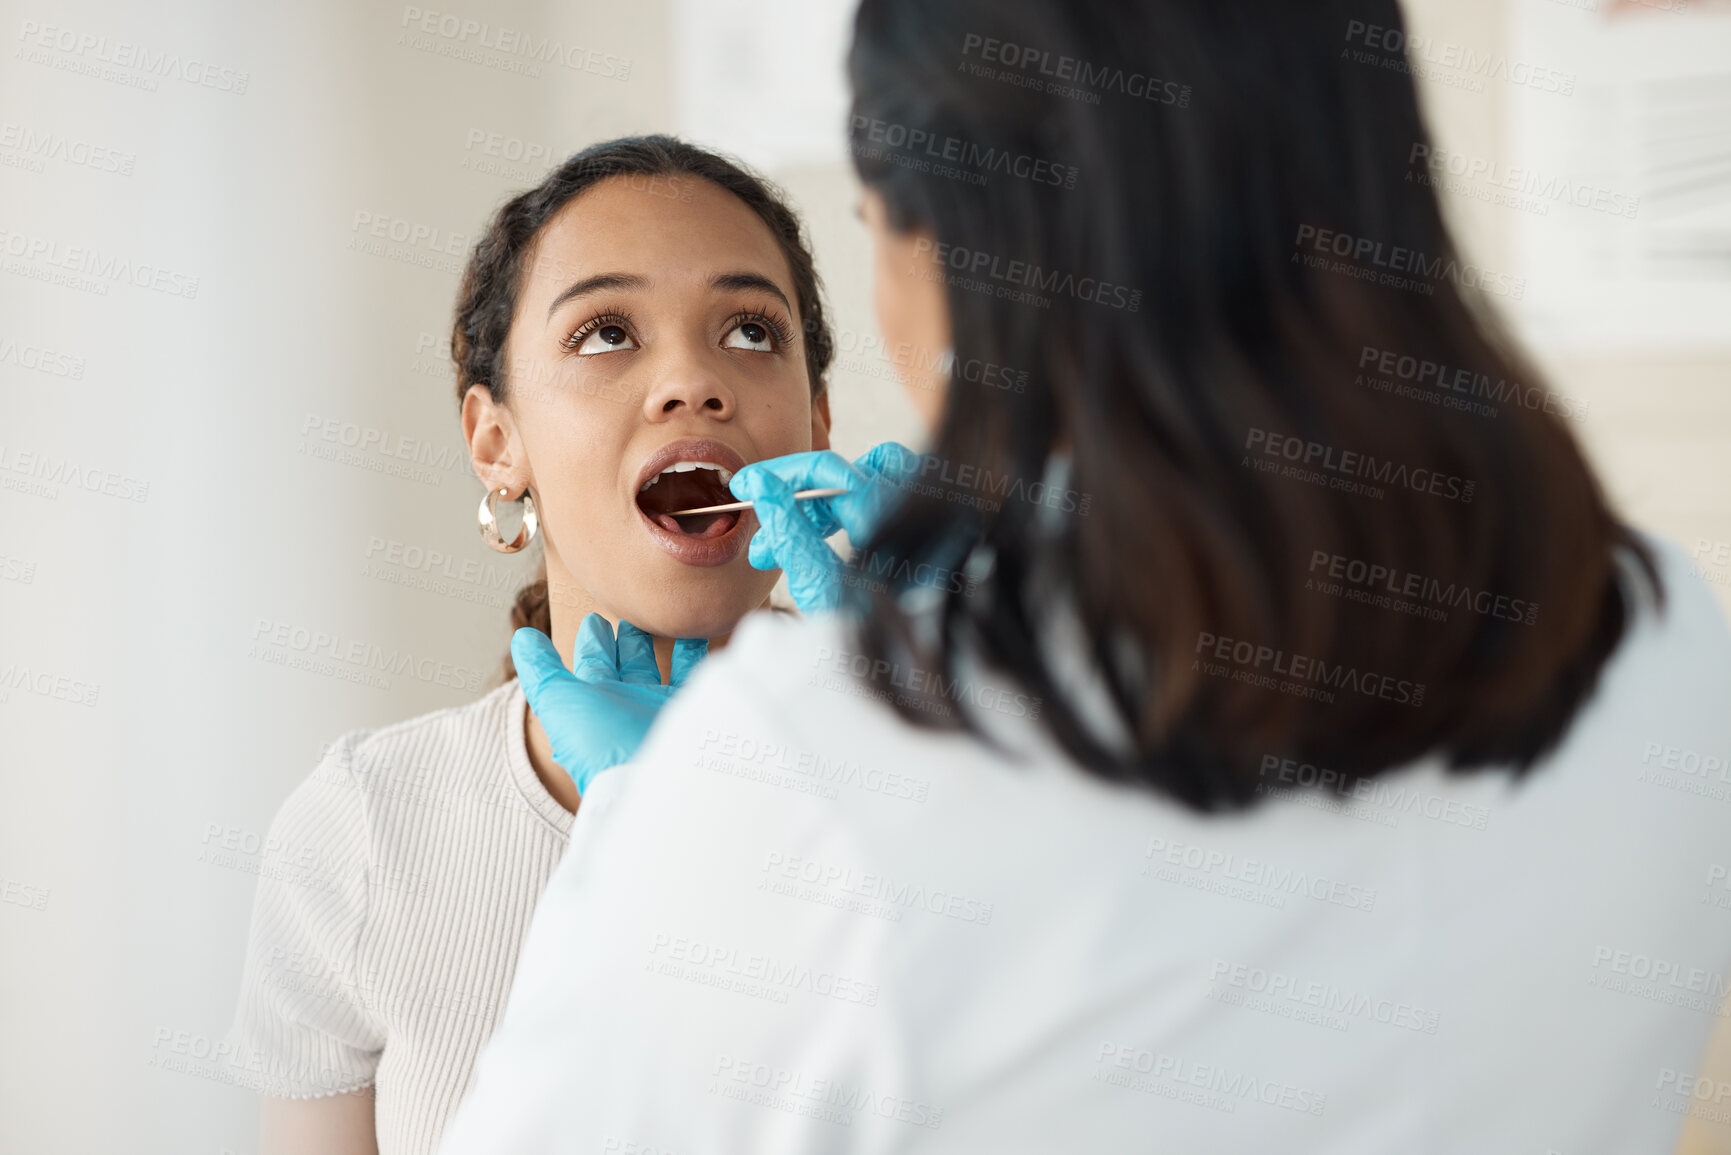 Buy stock photo Shot of a young woman sitting in the clinic while her doctor examines her throat during a consultation